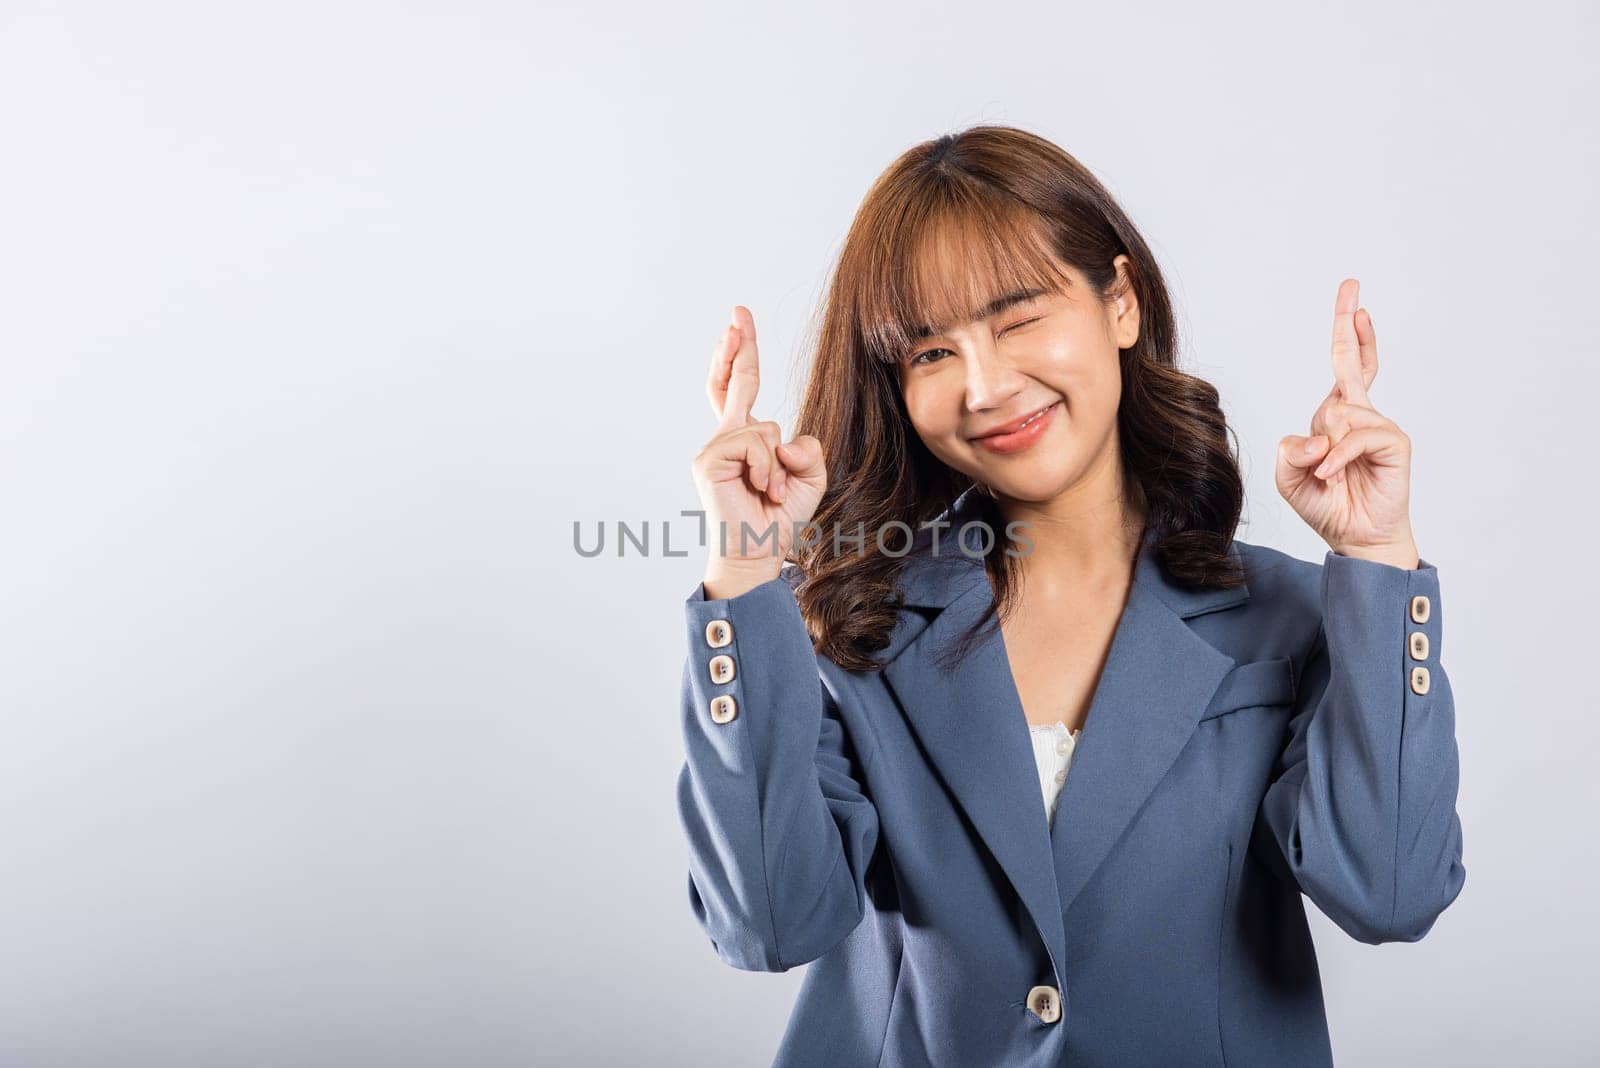 A beautiful young Thai woman is captured in a studio shot, her smiling face reflecting happiness and hope. With crossed fingers, she silently conveys her belief in good luck and positive vibes.